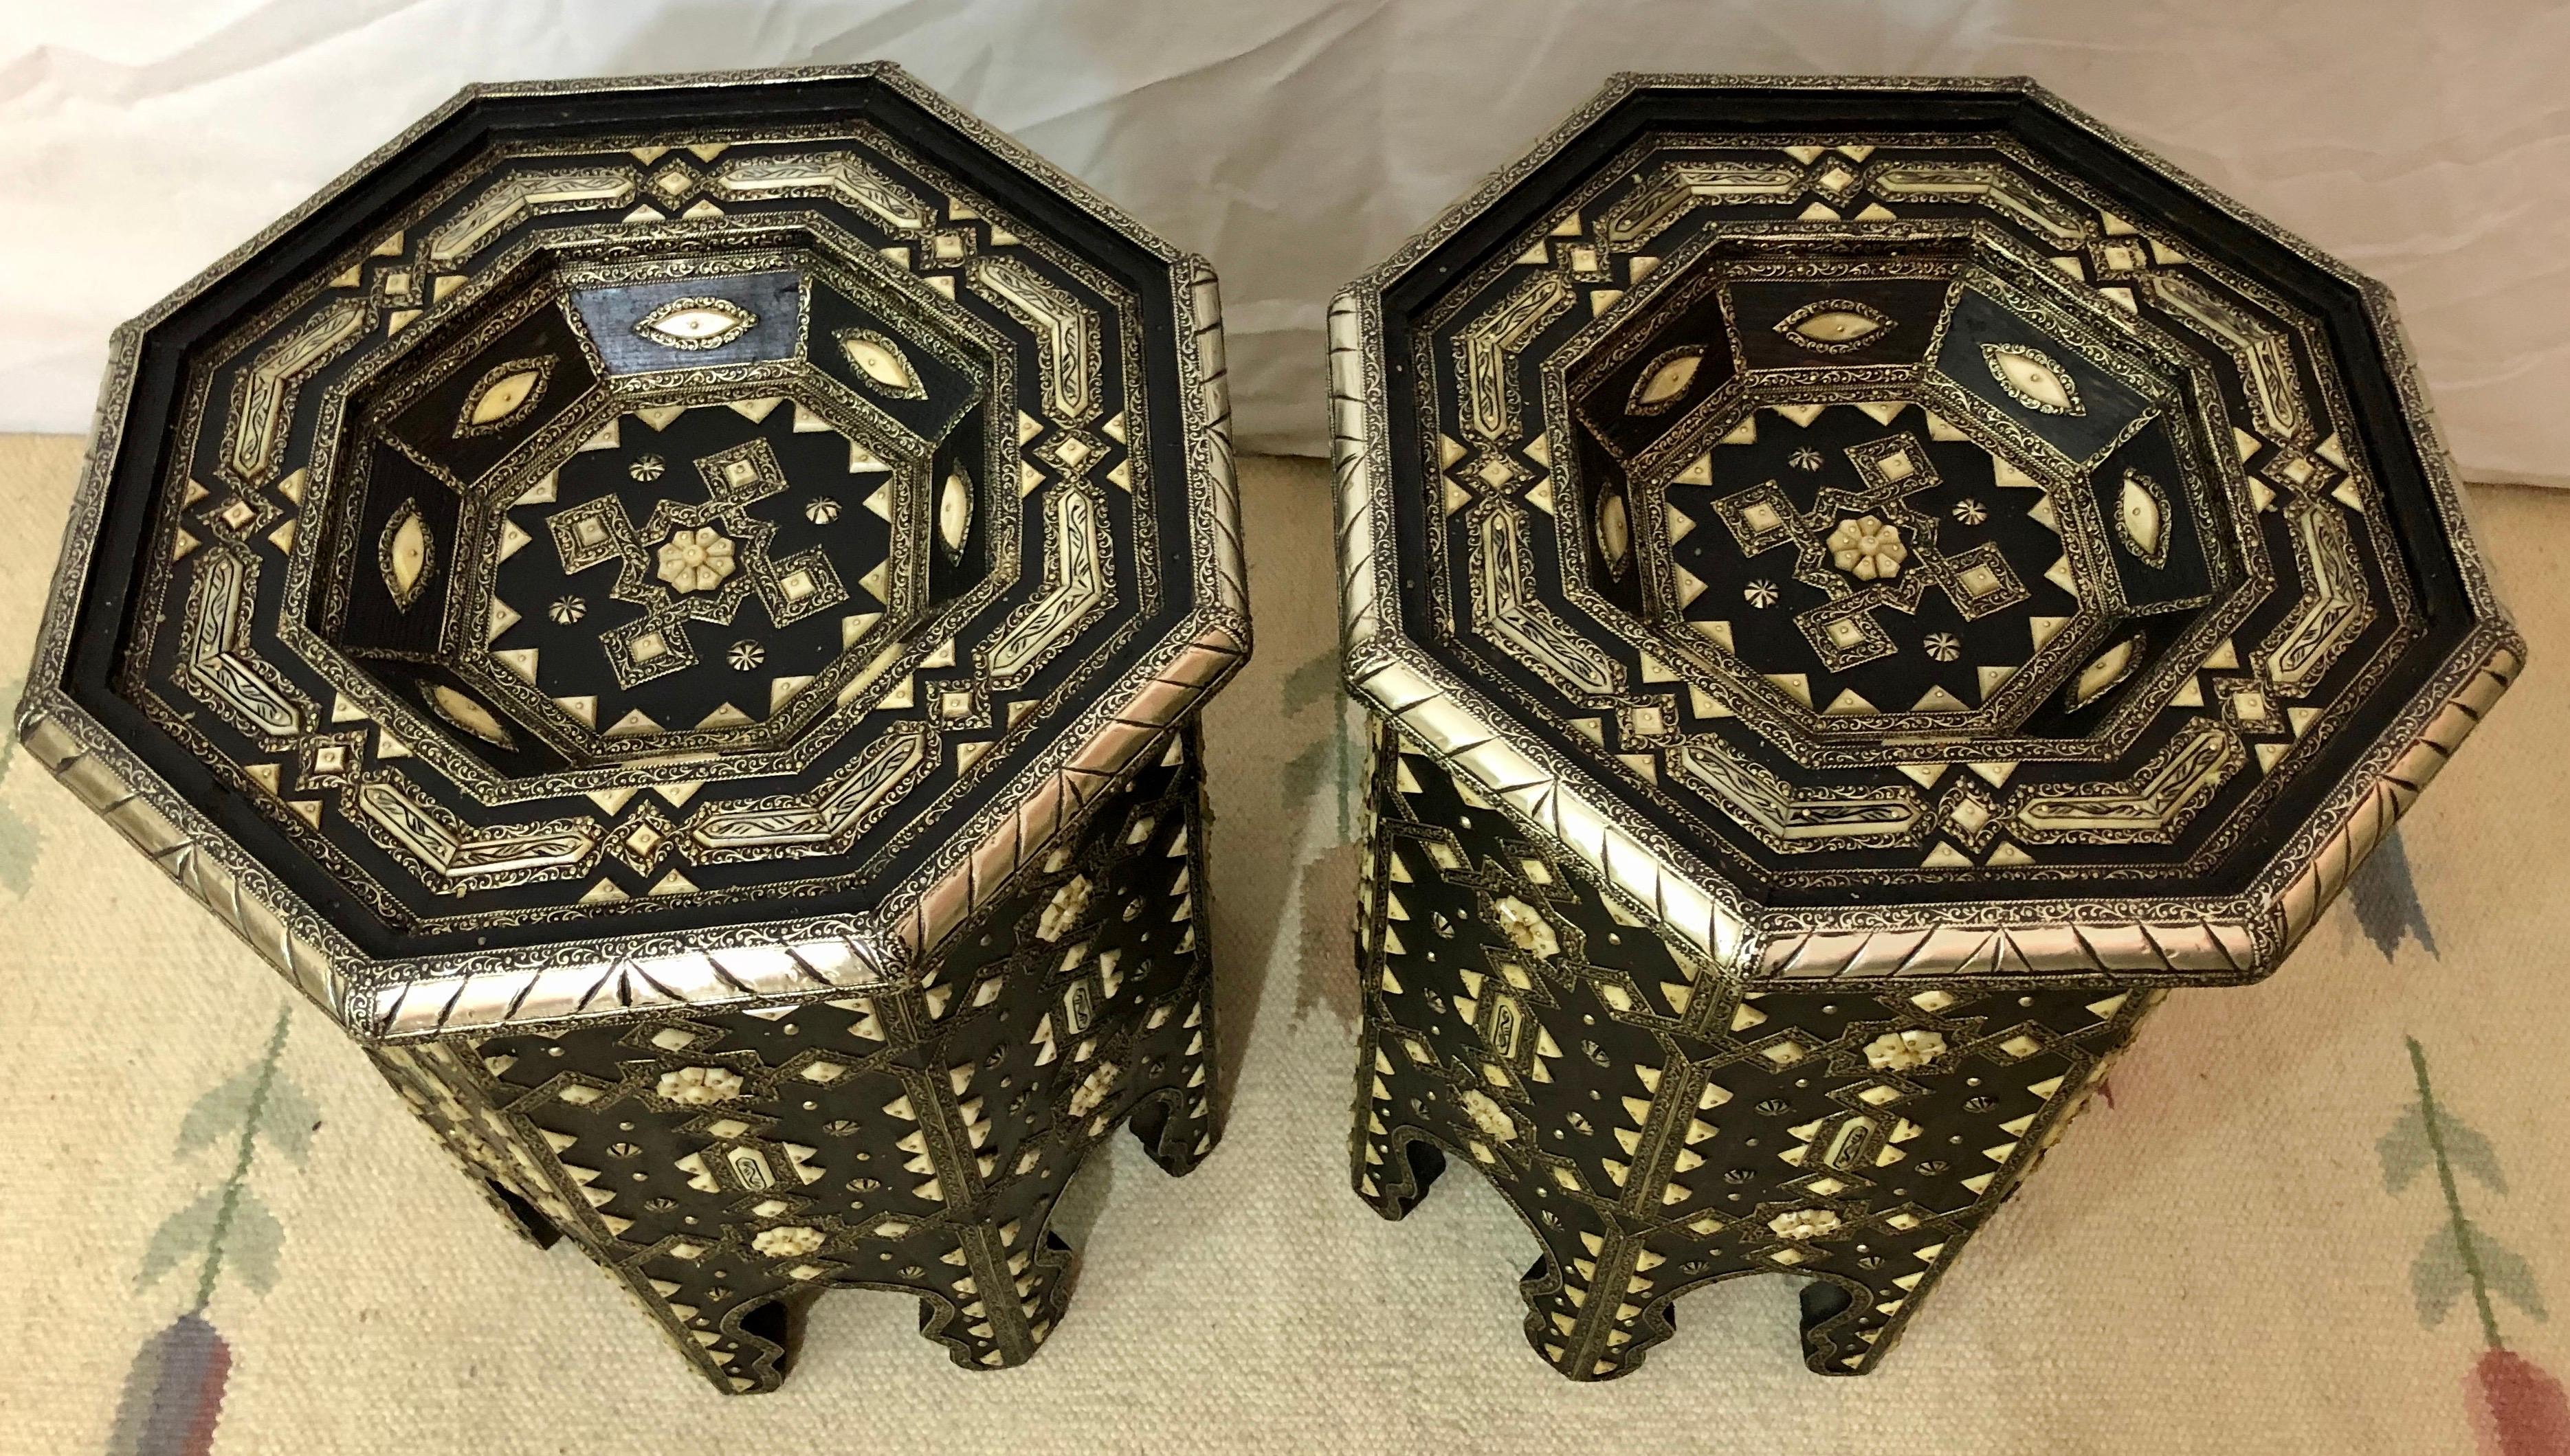 This luxurious wooden and brass table is an exotic and sophisticated addition to any room. Featuring a dazzling geometric pattern with white natural camel bone and brass inlay, black and white color combinations and a beautifully realized Moorish